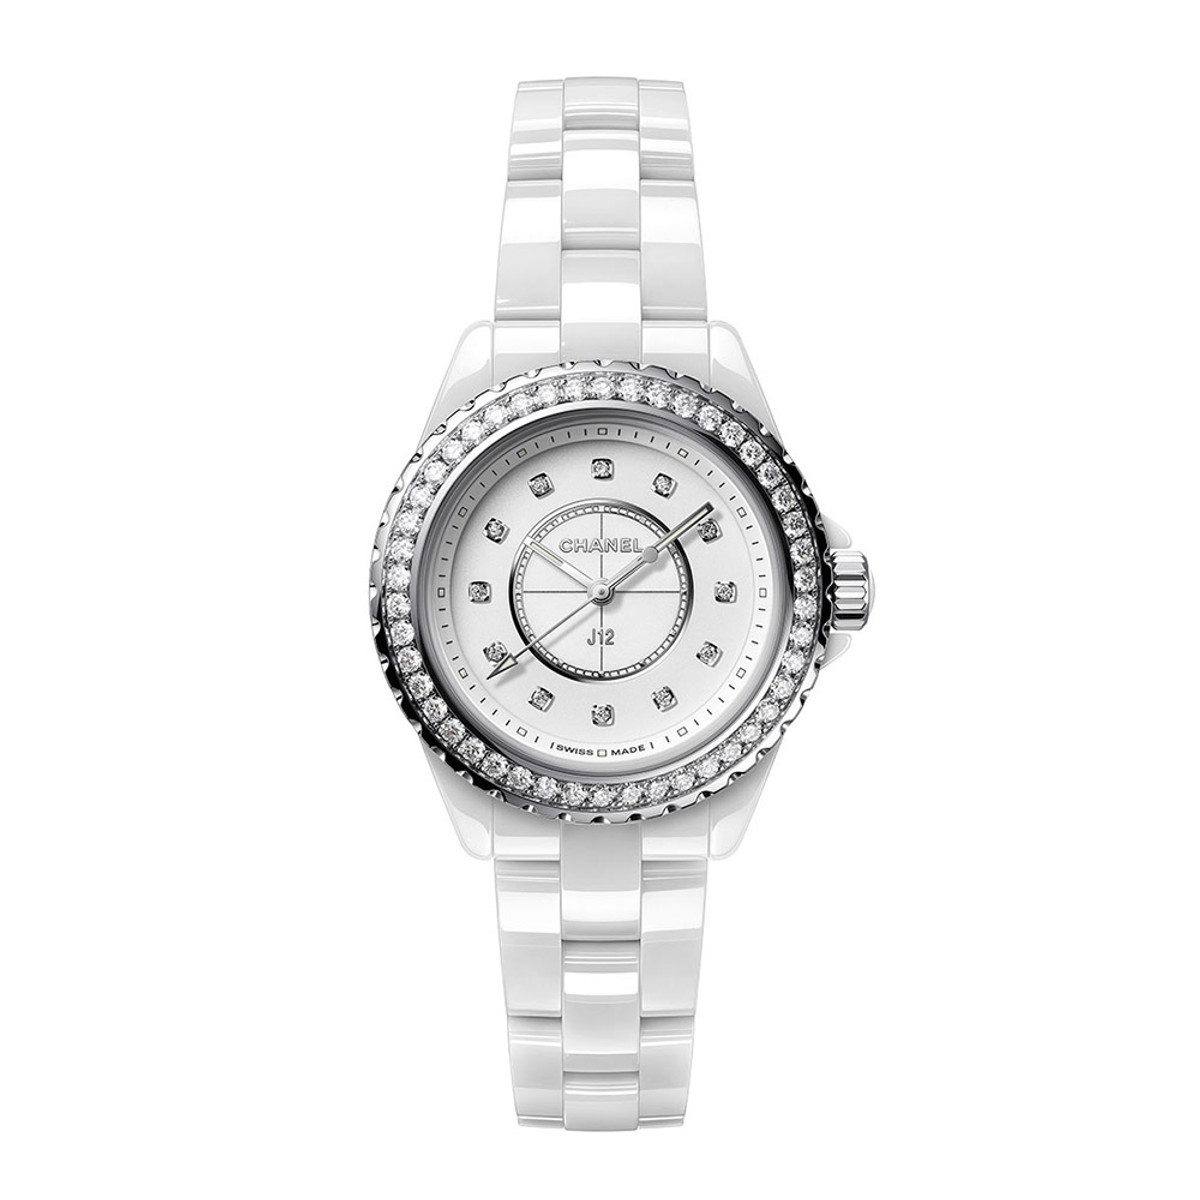 CHANEL J12 WATCH, 33 MM-33024 Product Image